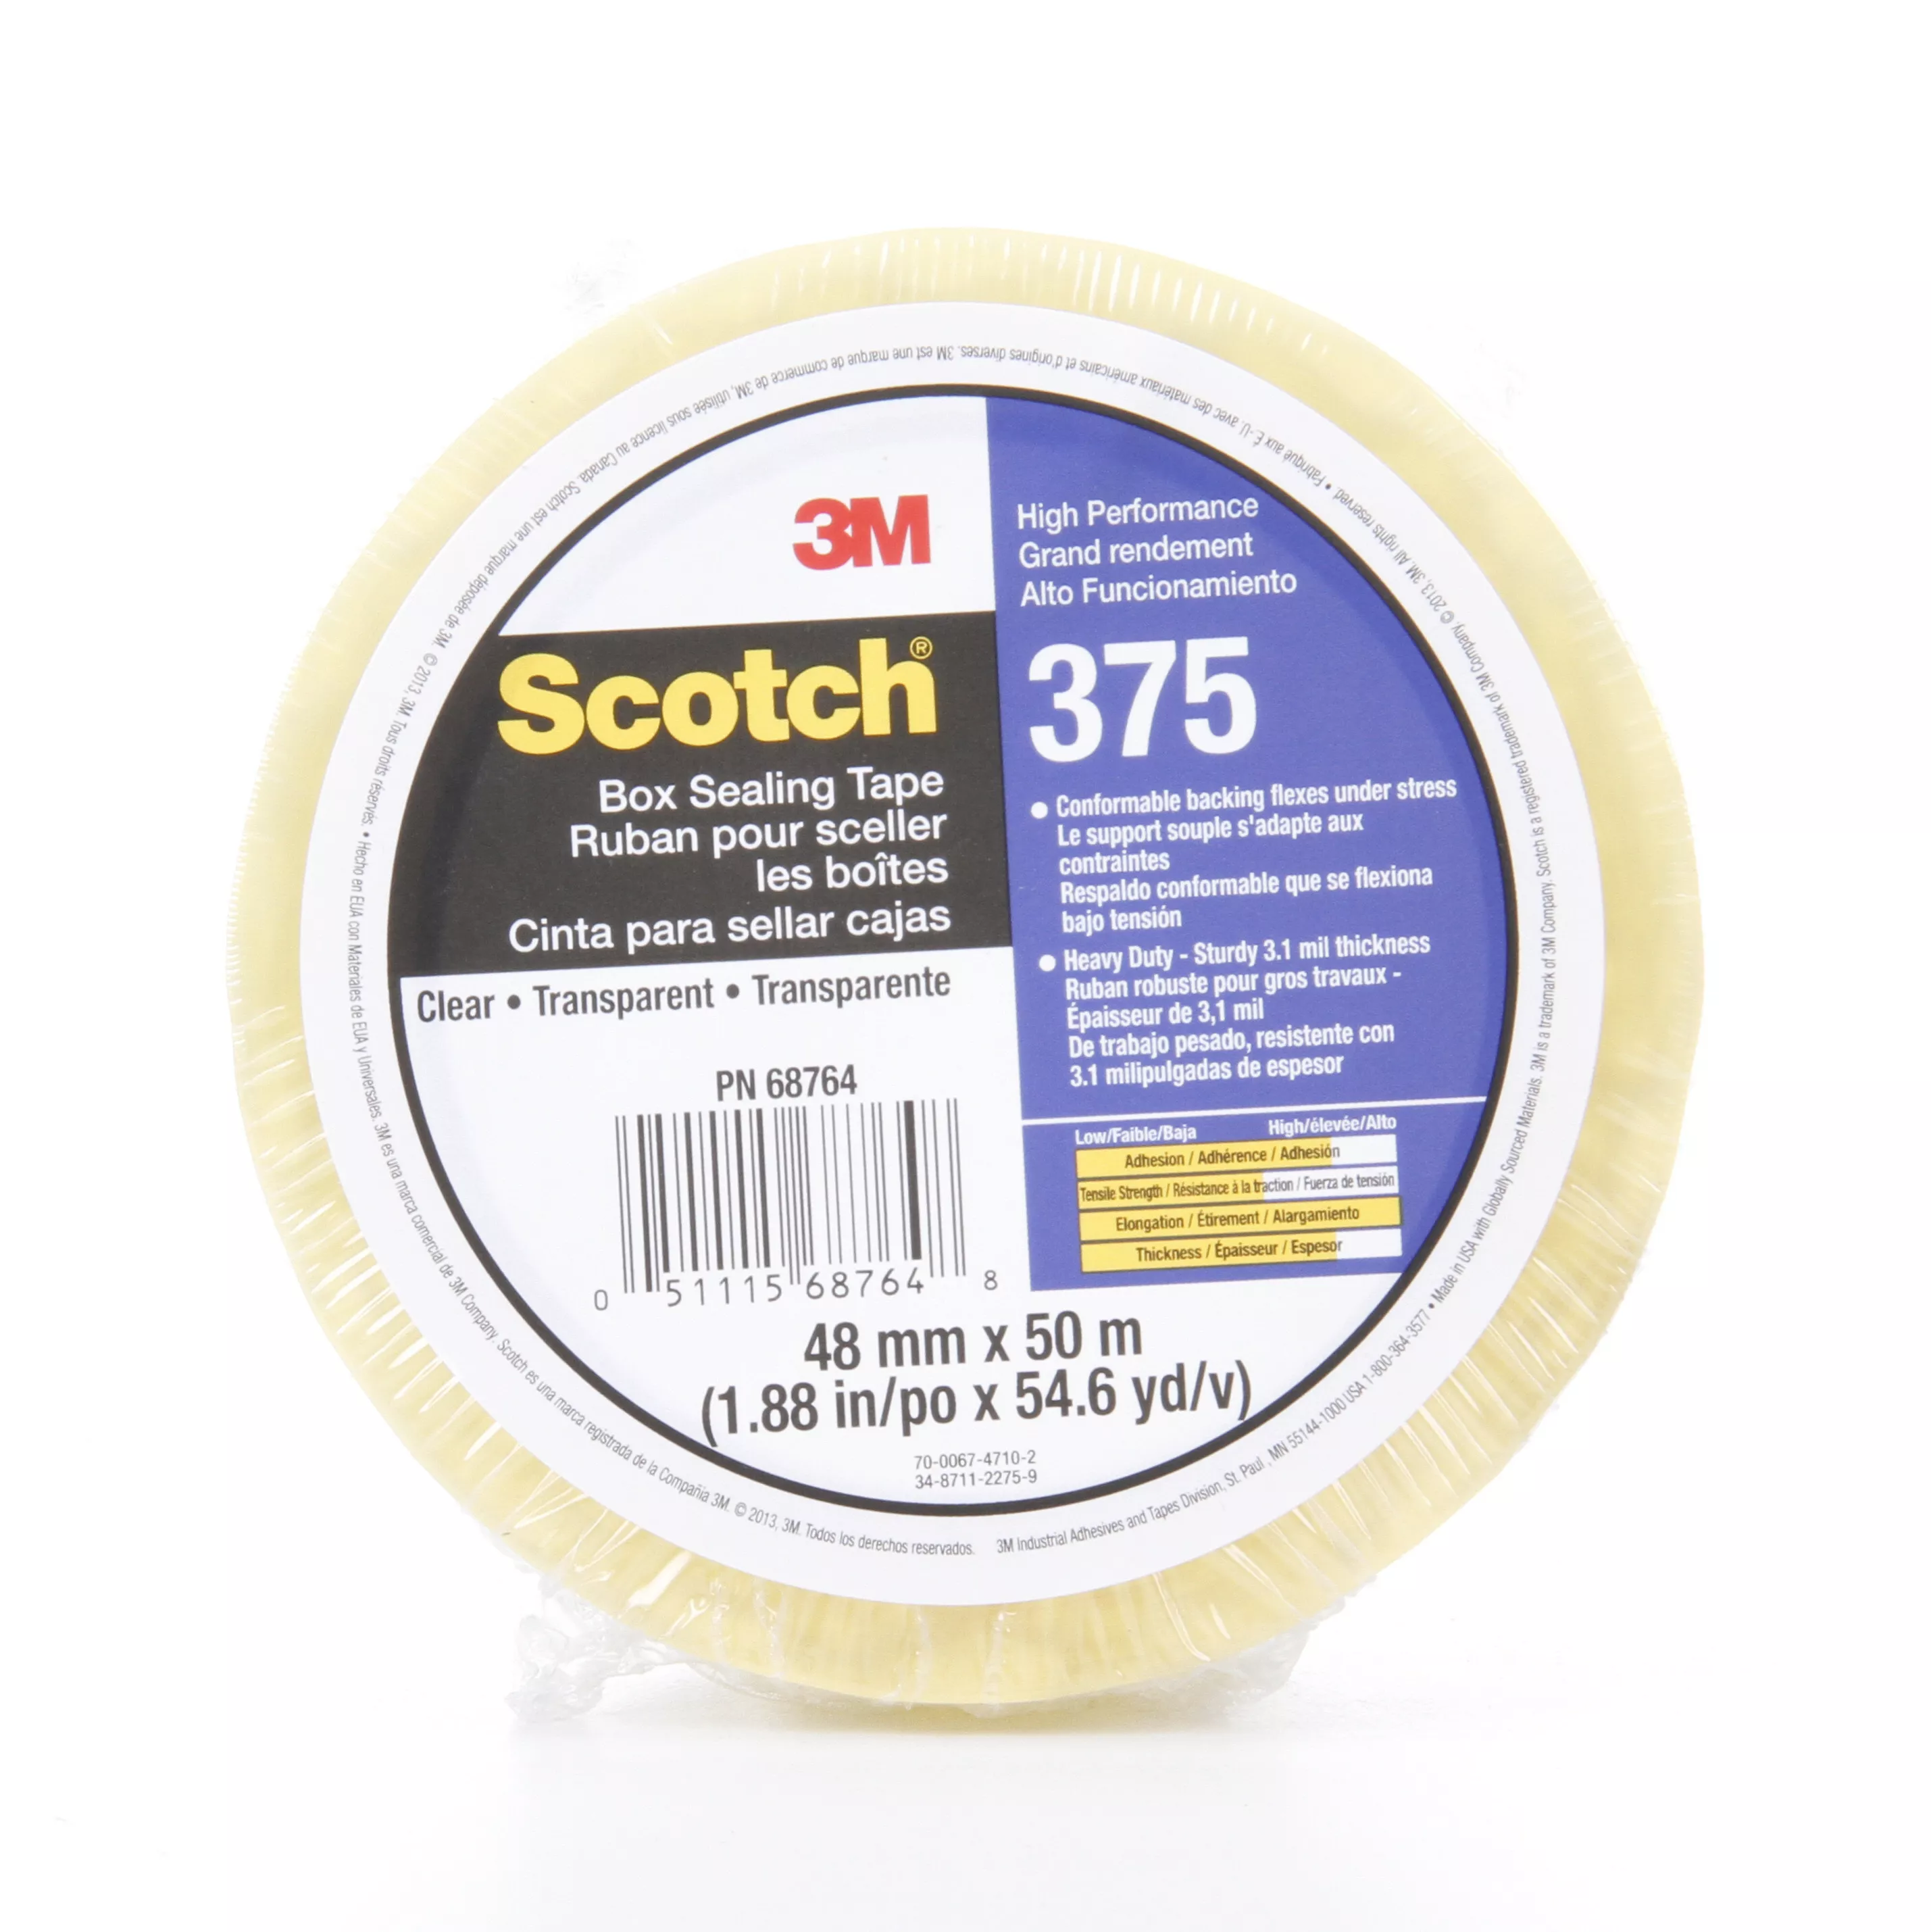 Scotch® Box Sealing Tape 375, Clear, 48 mm x 50 m, 36/Case, Individually
Wrapped Conveniently Packaged